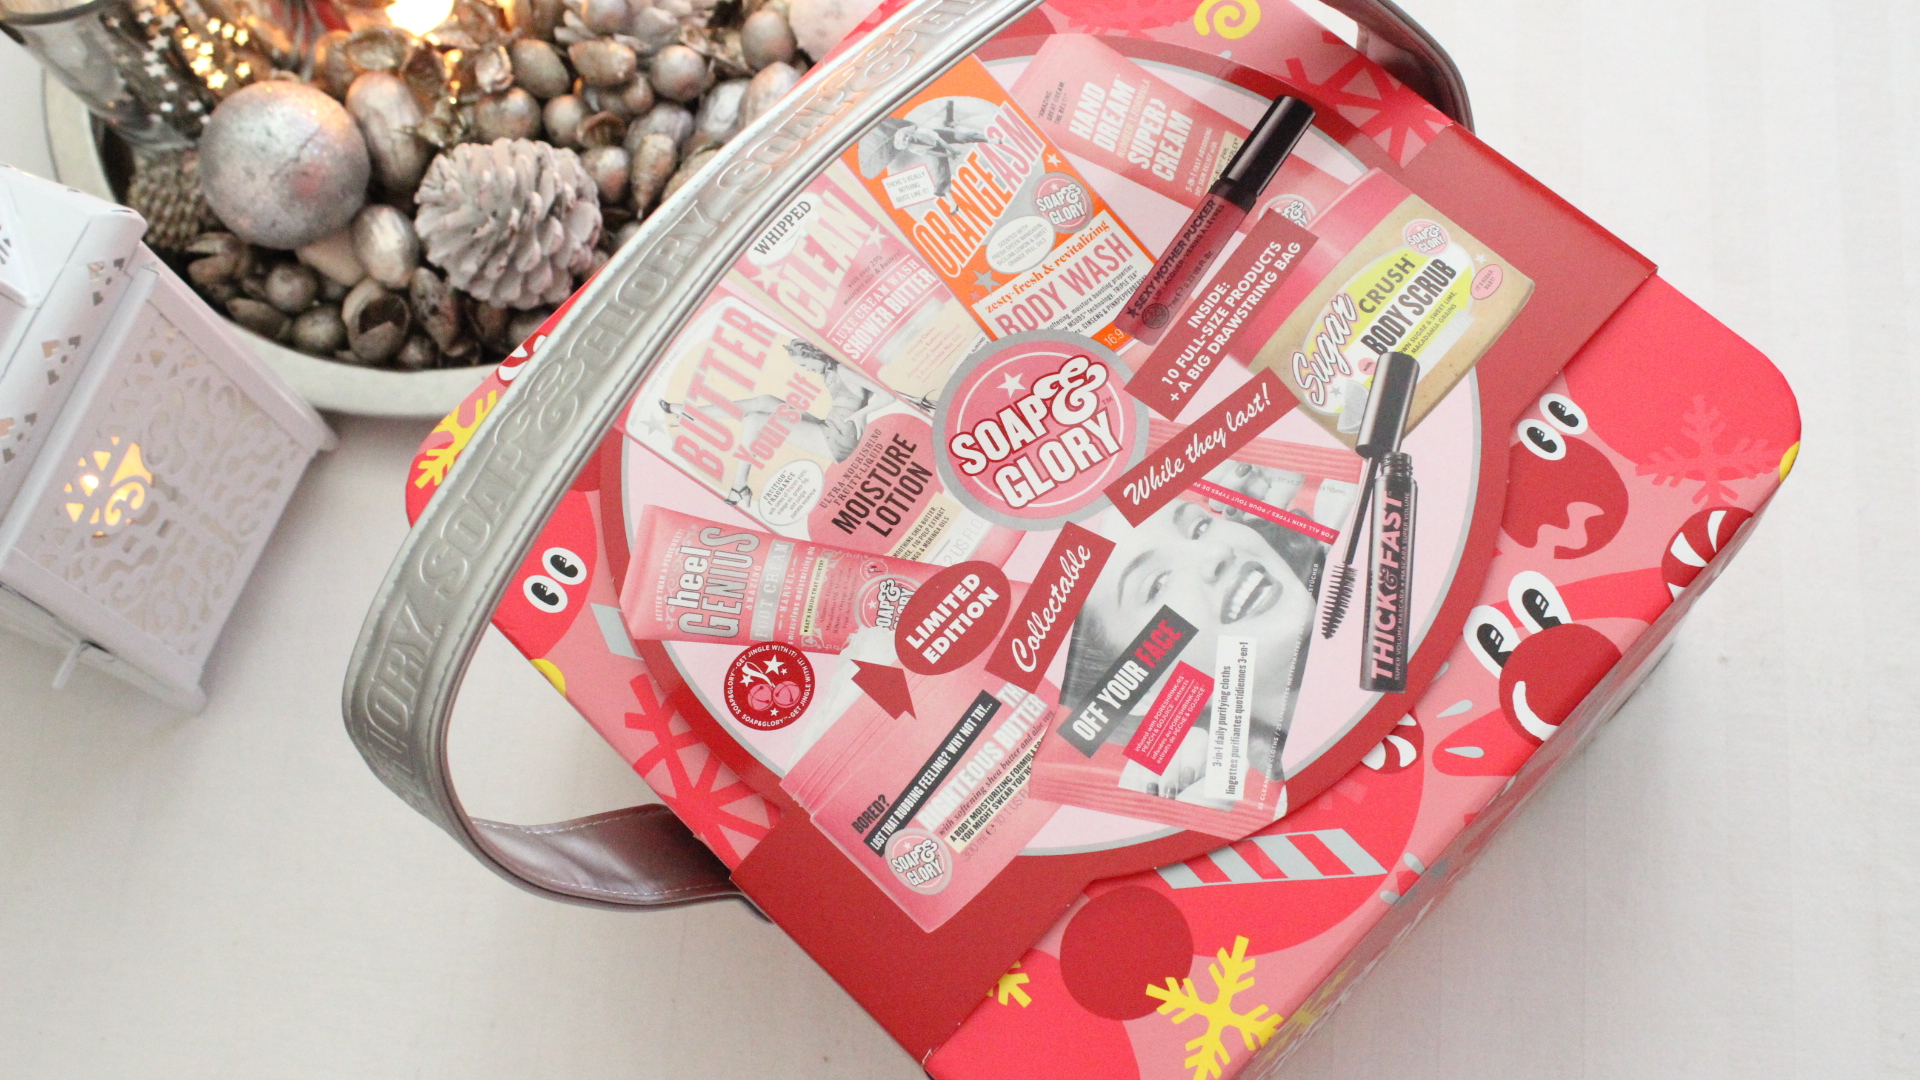 soap and glory large gift set